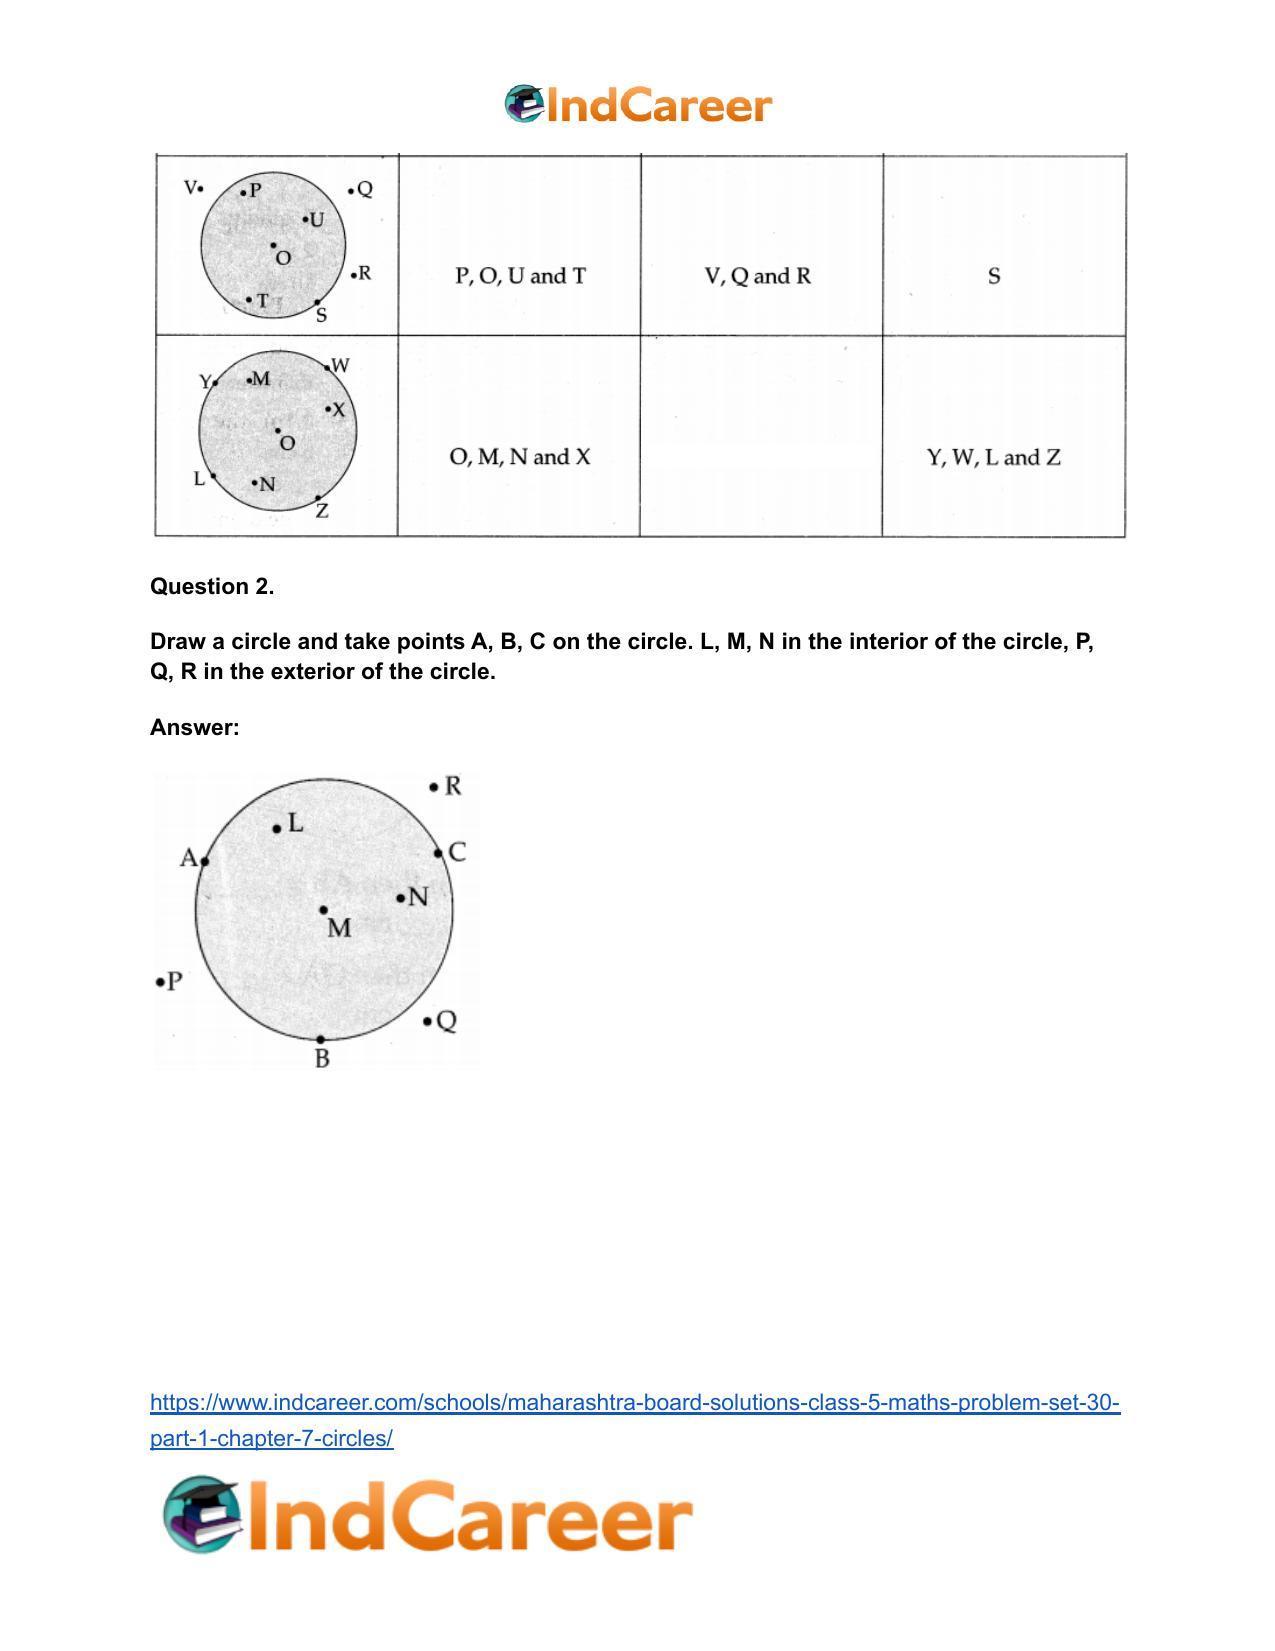 Maharashtra Board Solutions Class 5-Maths (Problem Set 30) - Part 1: Chapter 7- Circles - Page 5